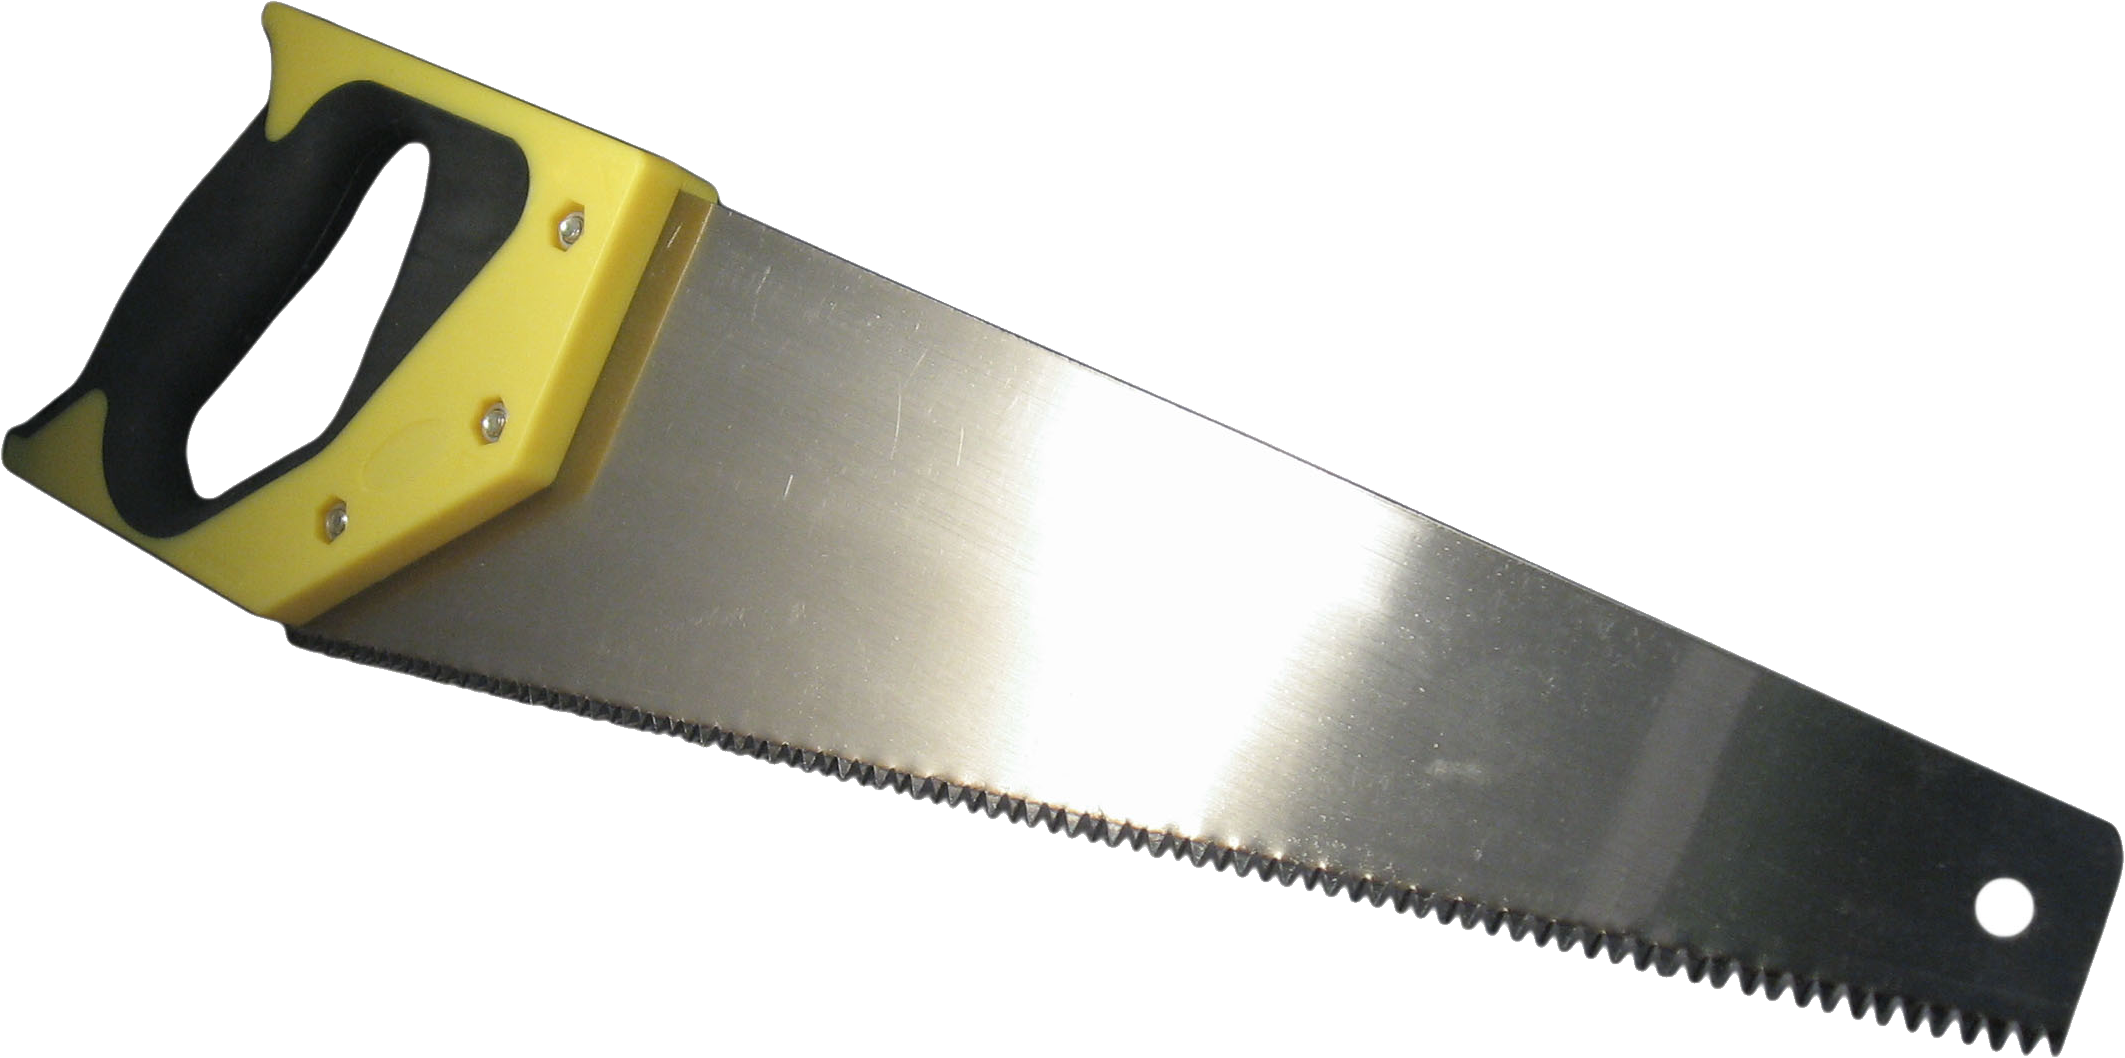 Hand Saw Png Image - Hand Saw, Transparent background PNG HD thumbnail